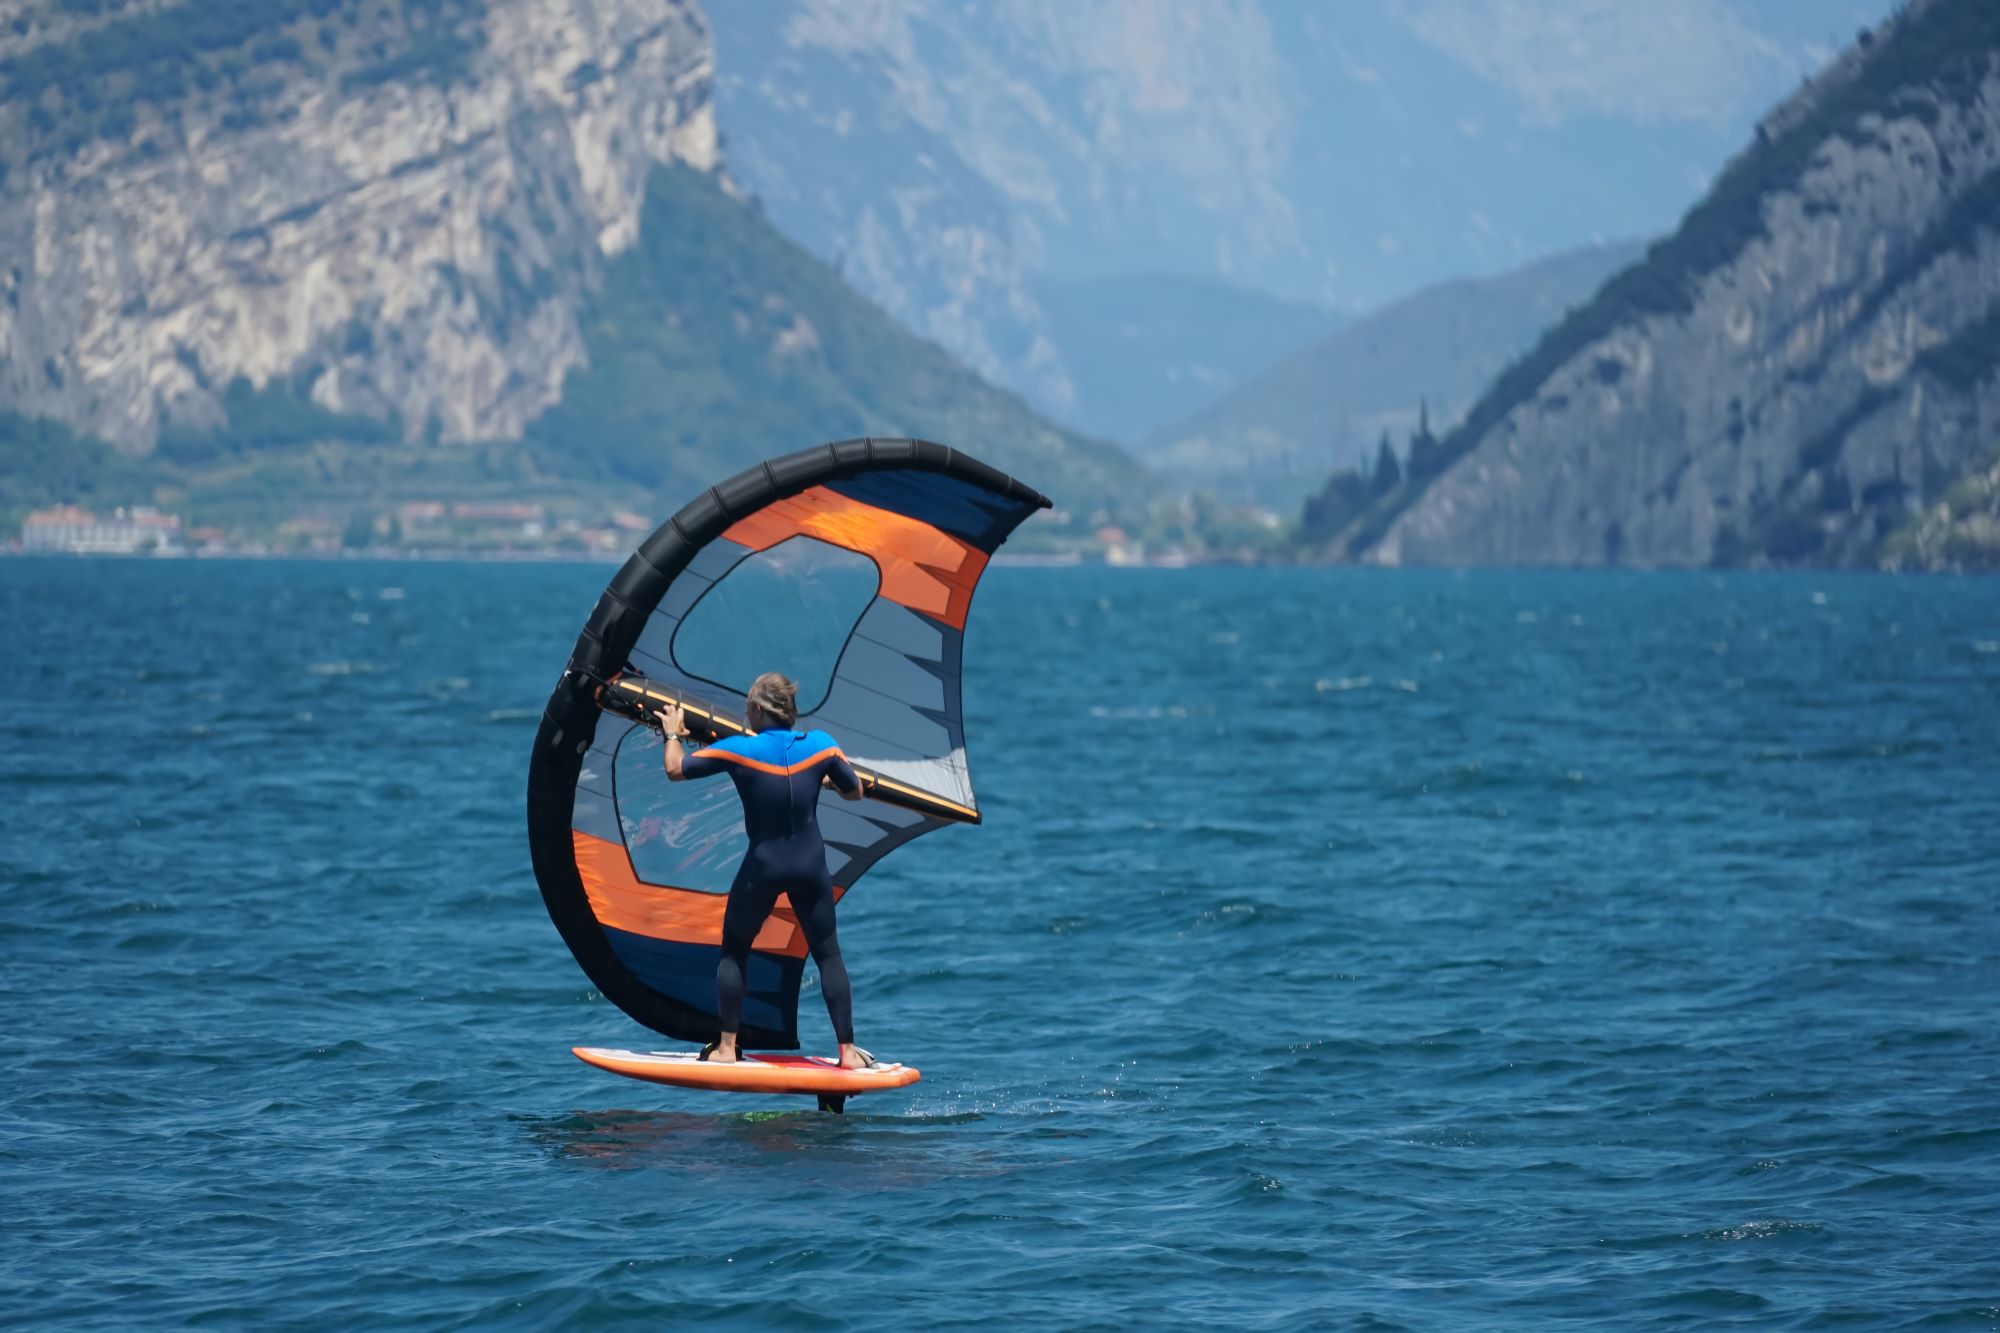 Incredible wing foiling experience on Lake Garda in Torbole, a paradise for water sports enthusiasts